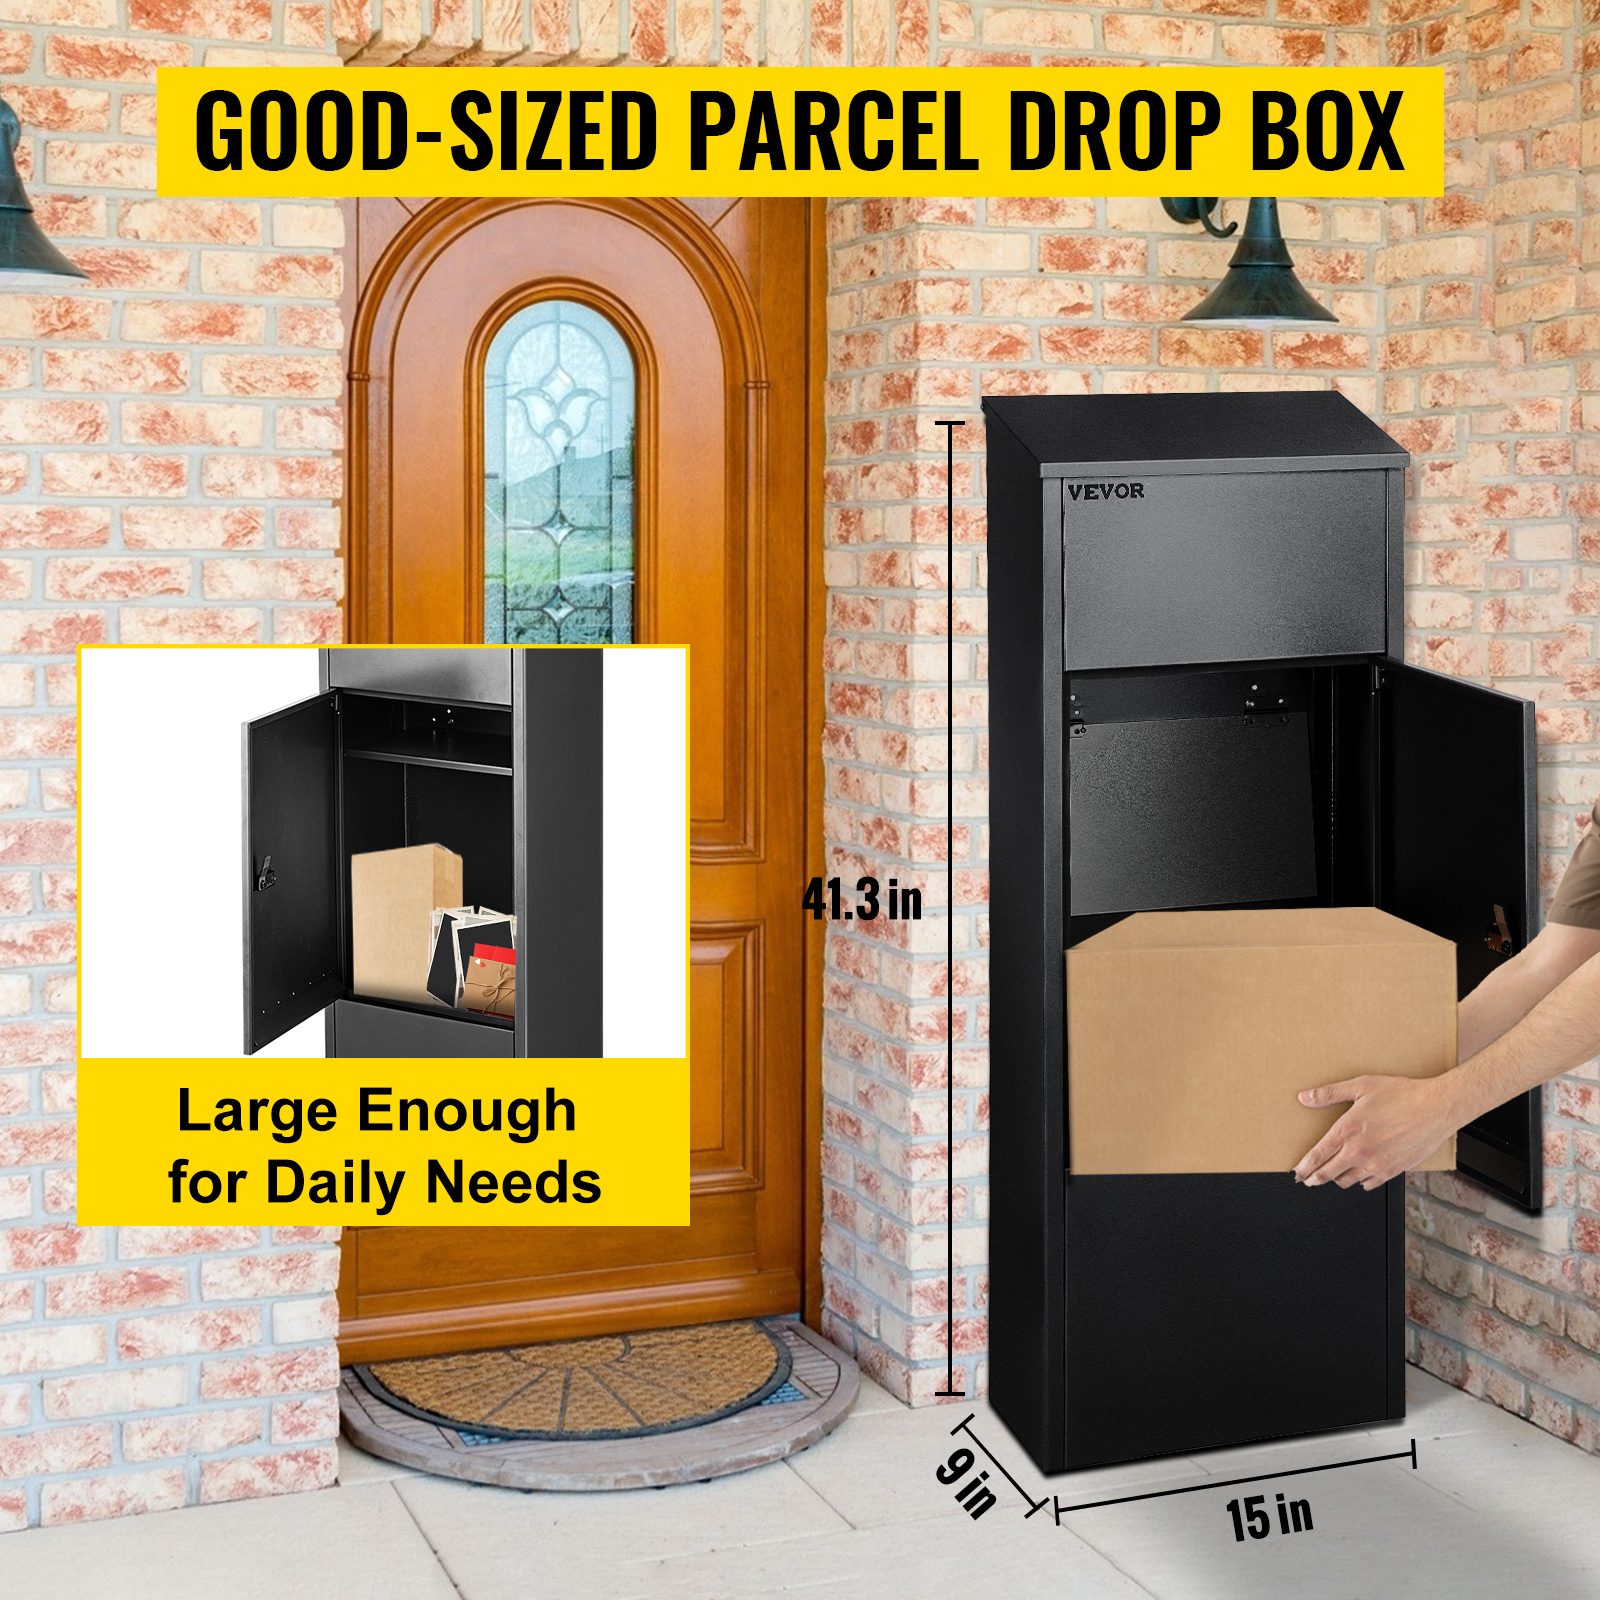 VEVOR Package Delivery Boxes for Outside 16.2x15.8x44, Galvanized Steel  Delivery Box for Packages With Coded Lock, Removable Anti-theft Baffle,  IPX3 Waterproof Package Drop Box for Outside, Porch 